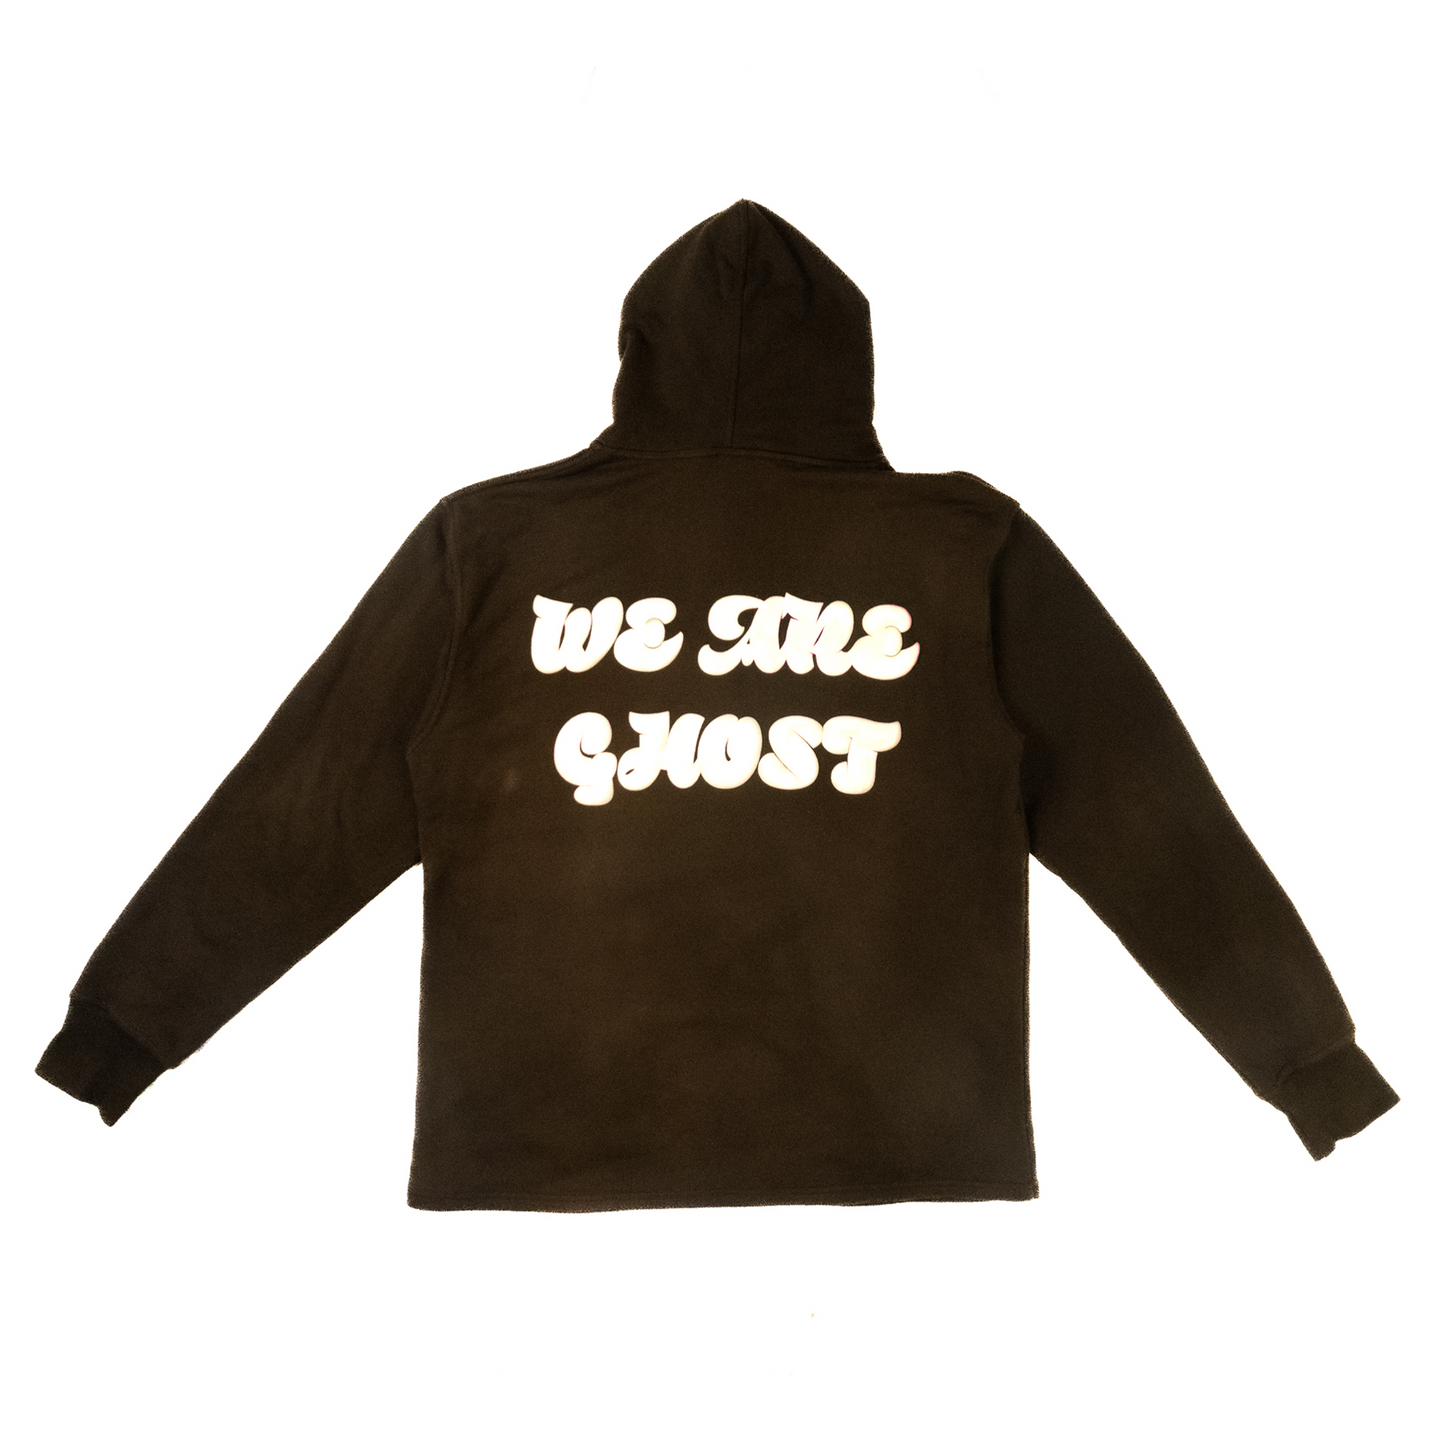 "We Are Ghost" Hemless Hoodie - The Limited Edition - Winter 2023